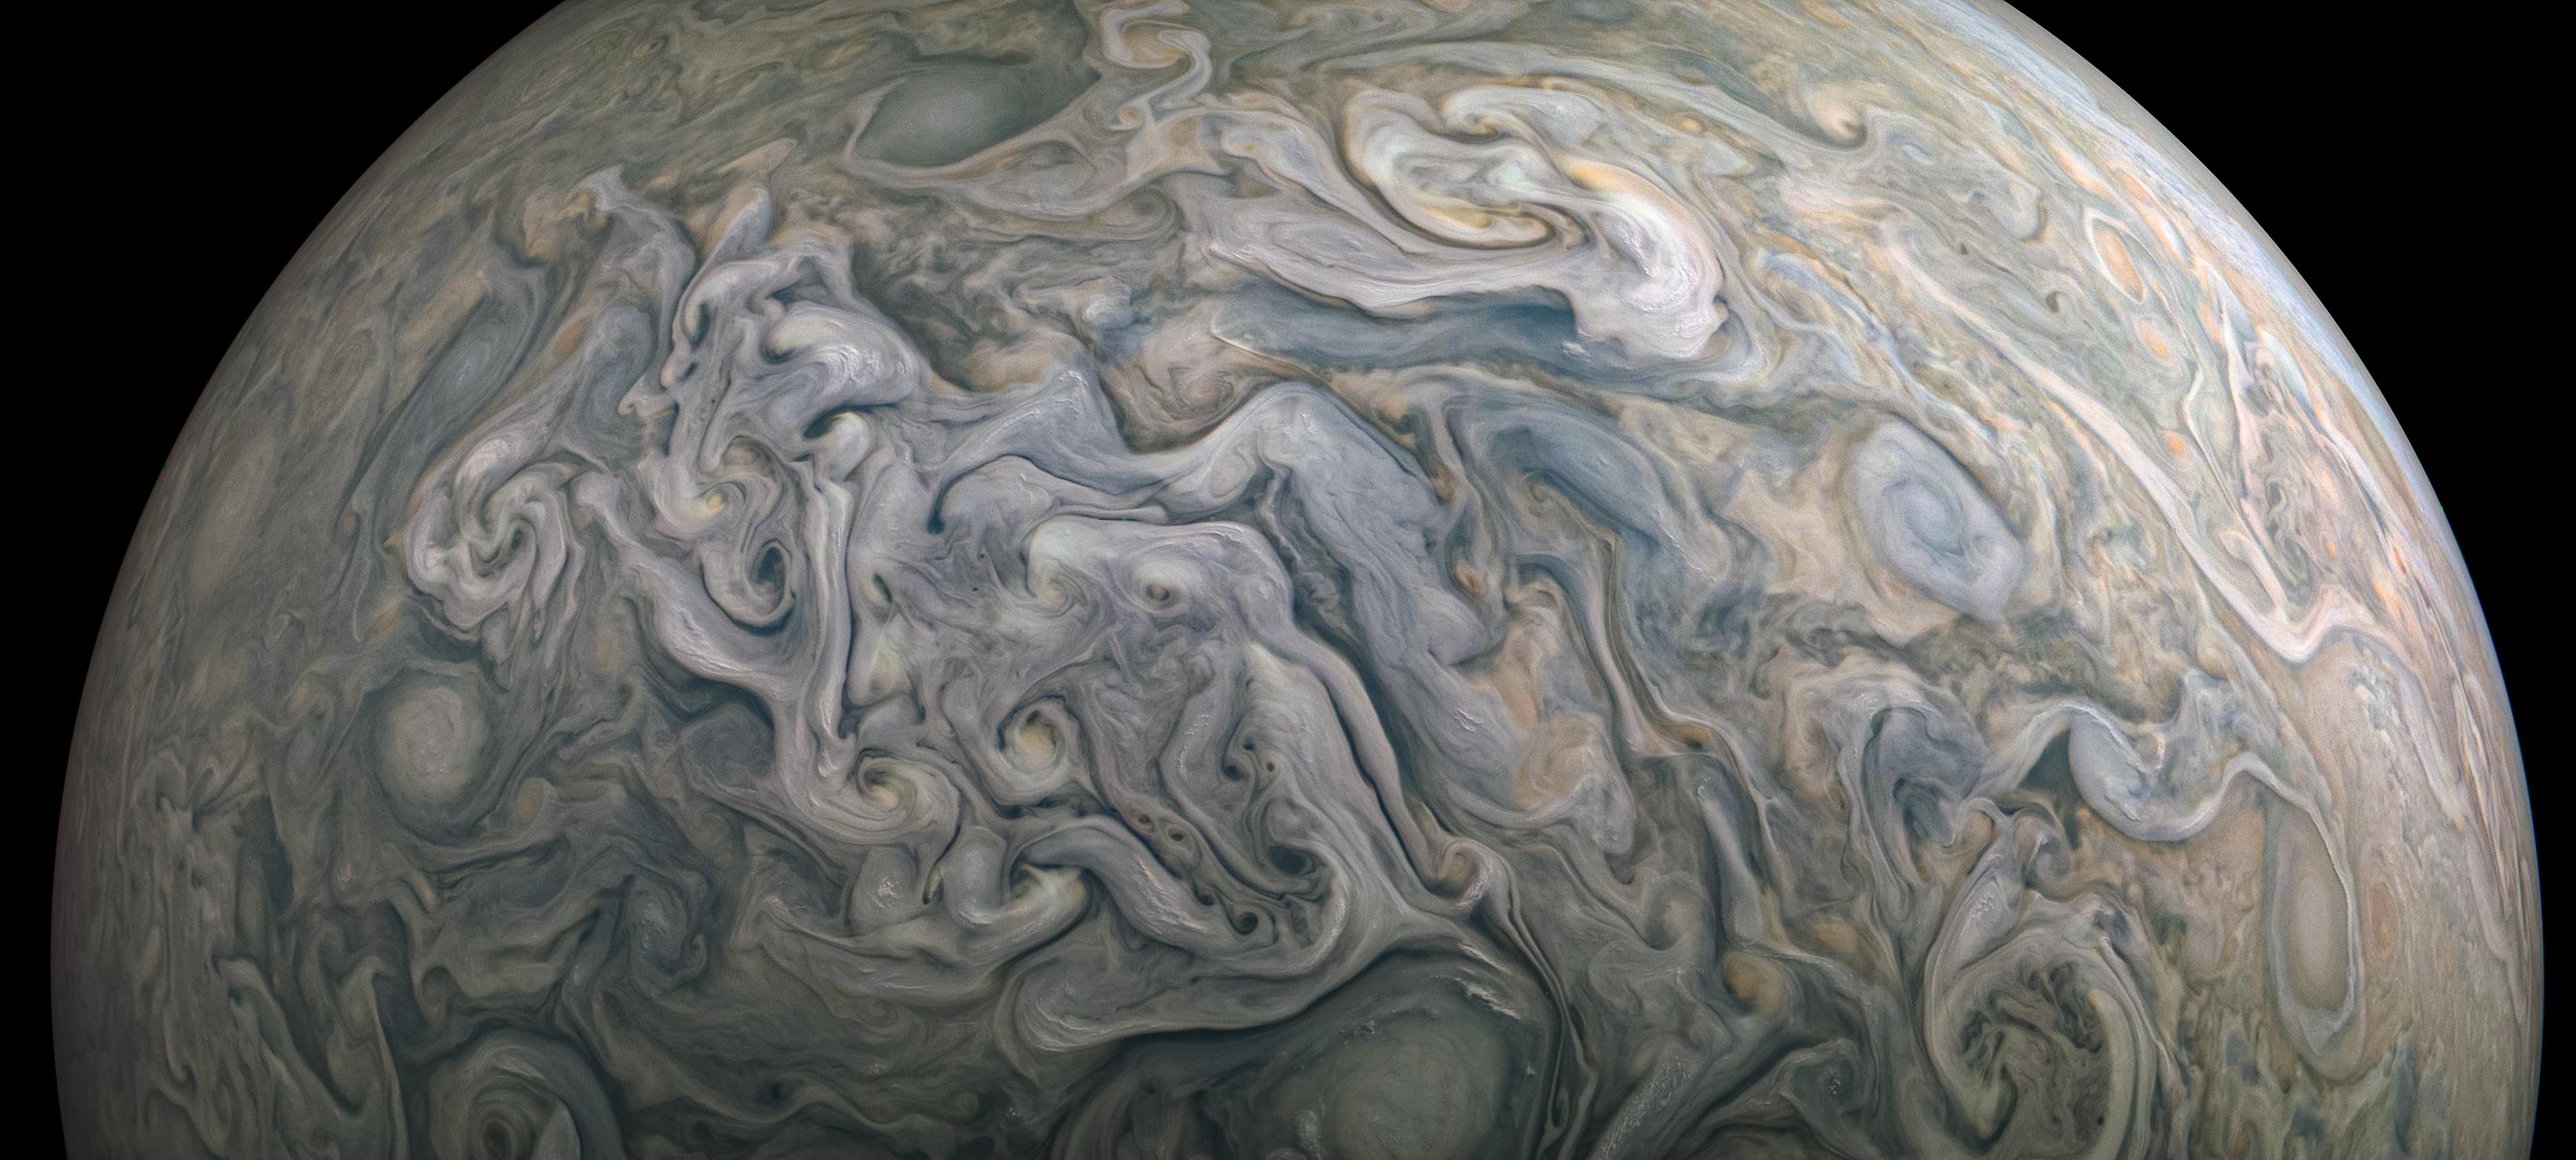 PIA23803: Churning Texture in Jupiter's Atmosphere